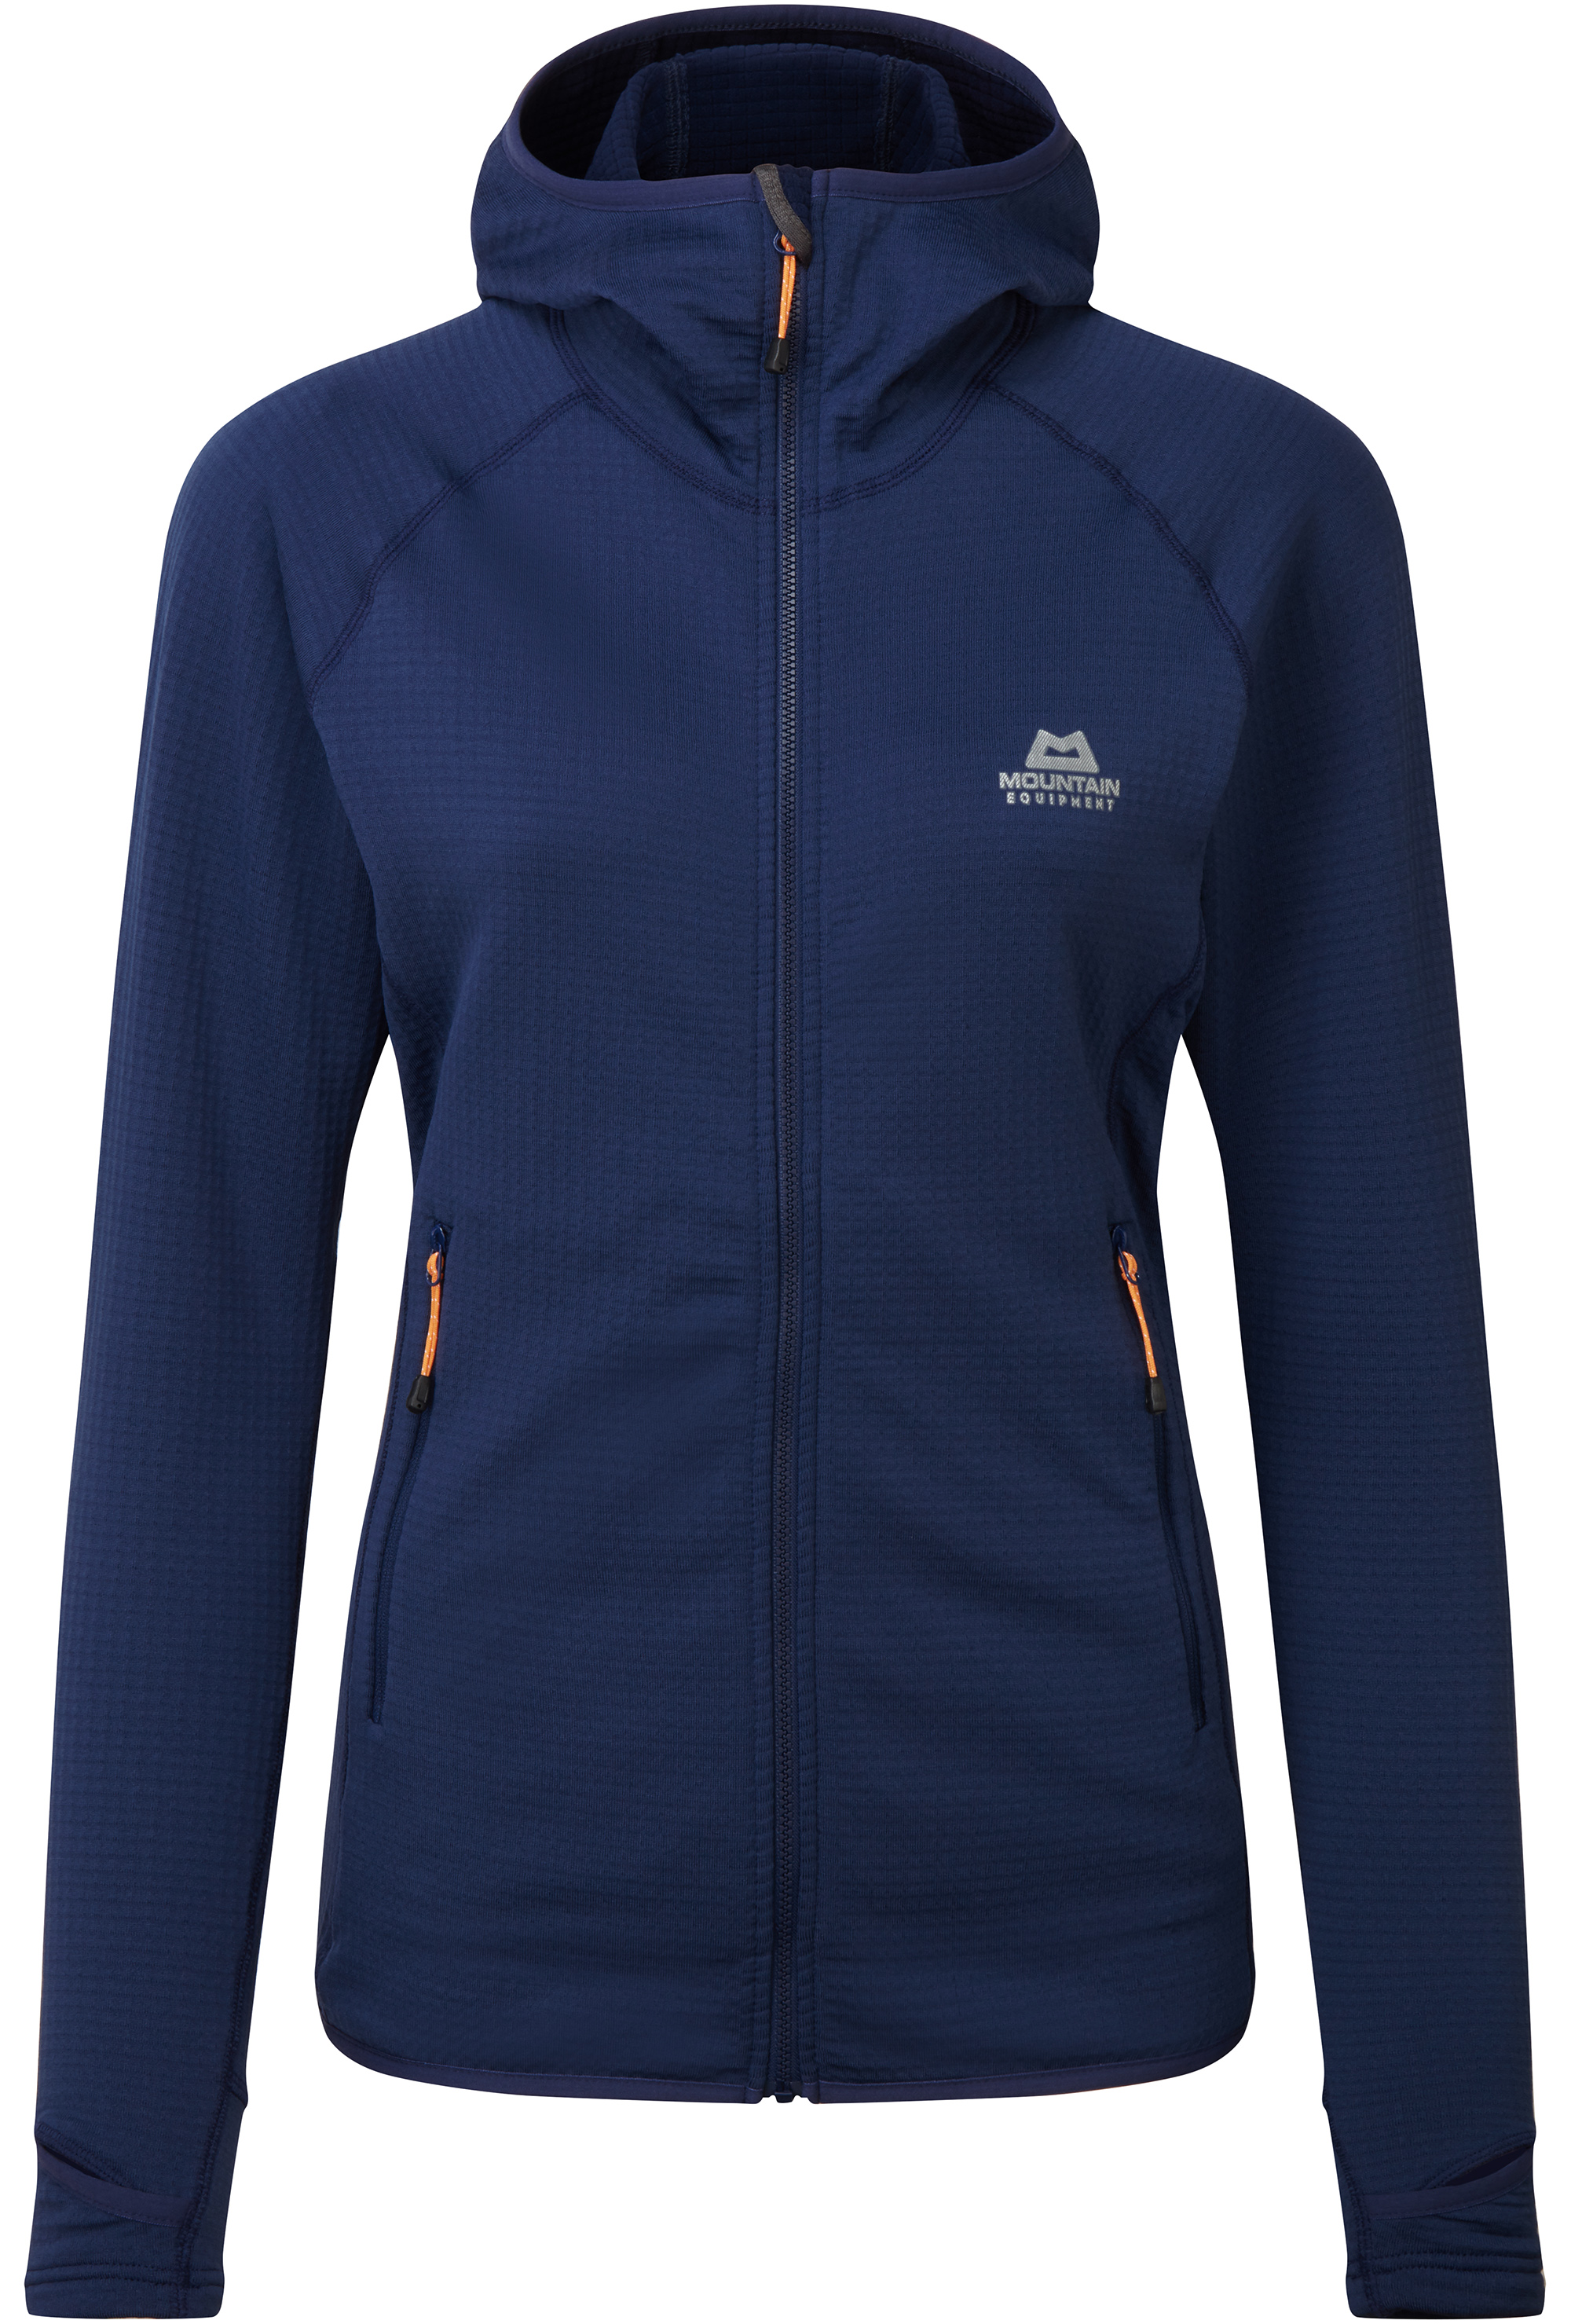 Mountain Equipment Eclipse Hooded Jacket Women'S Barva: Medieval Blue, Velikost: 16/XL